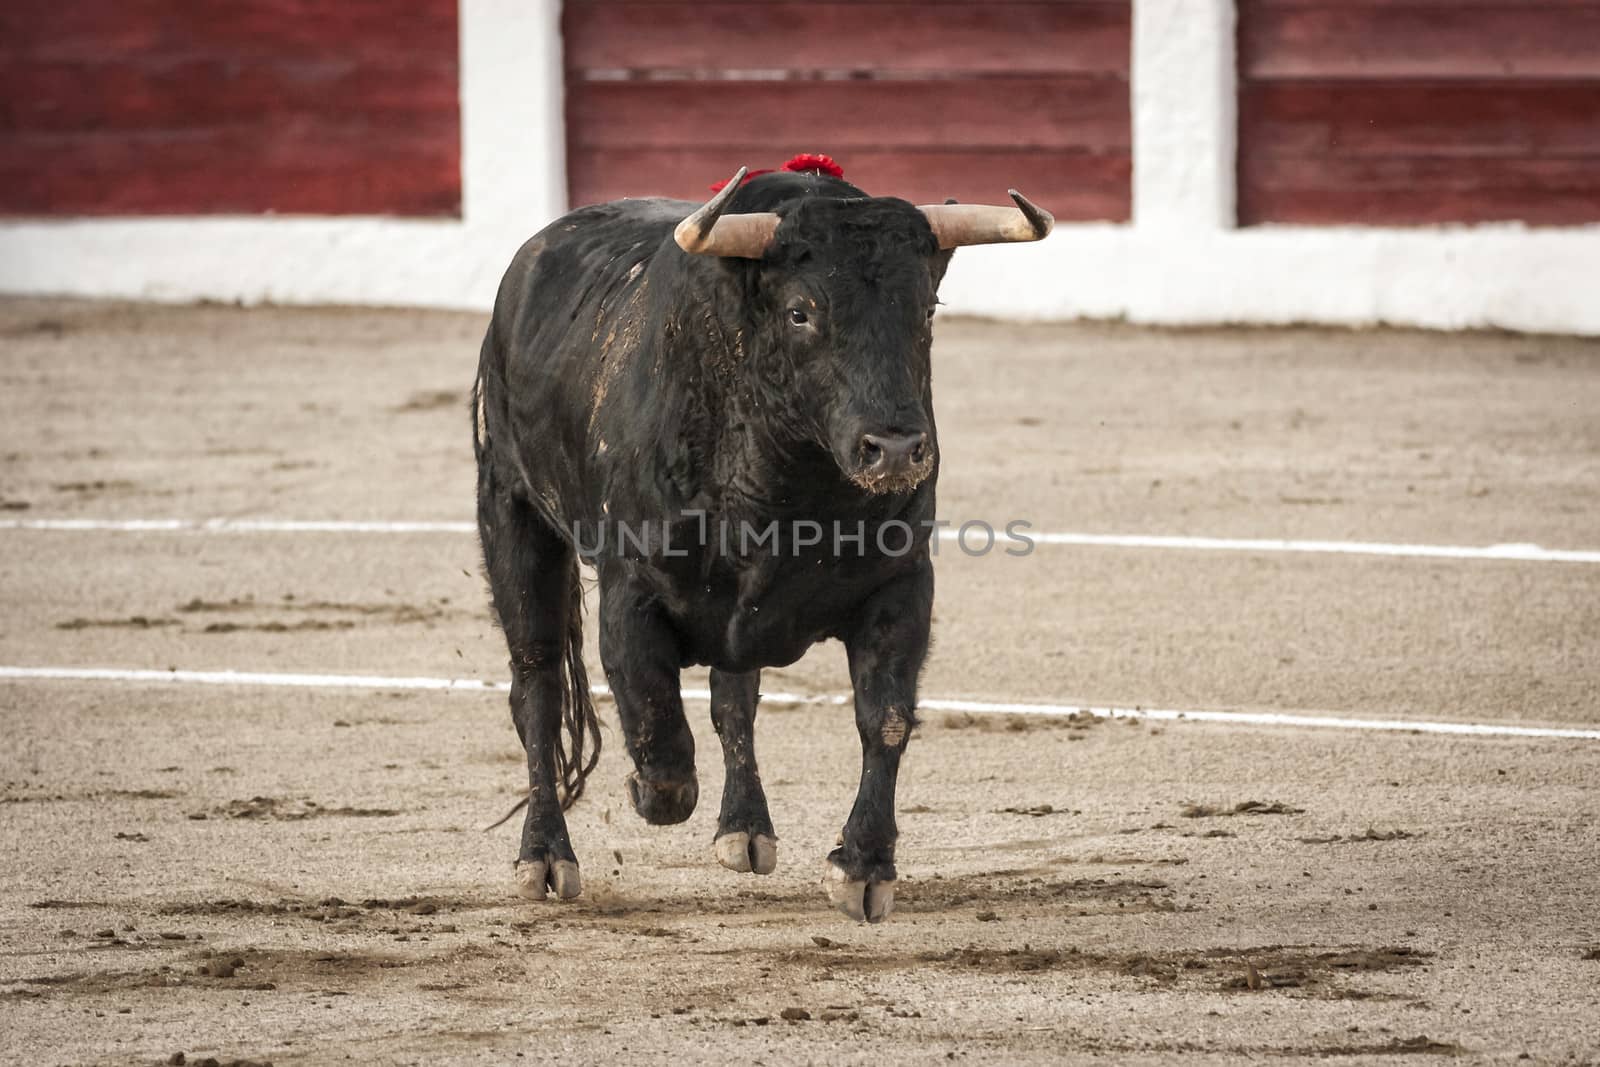 Linares, Jaen province, SPAIN - 28 august 2011: Bull about 650 Kg galloping in the sand right when I just got out of the bullpen, in the Linares bullring or also called arena of Santa Margarita, Linares, Jaen province, Andalusia, Spain